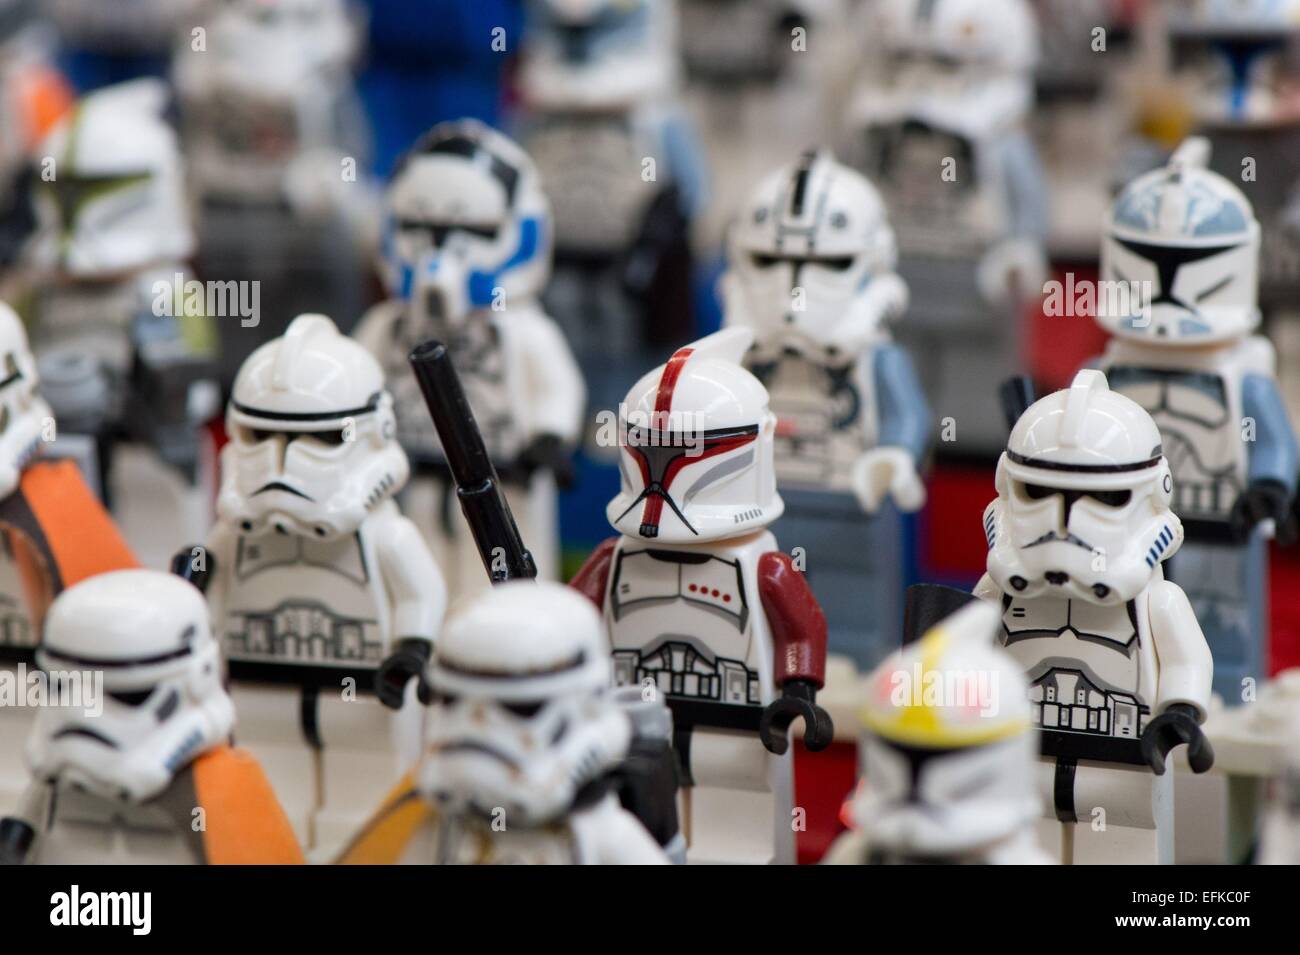 Lego Display Star Wars High Resolution Stock Photography and Images - Alamy